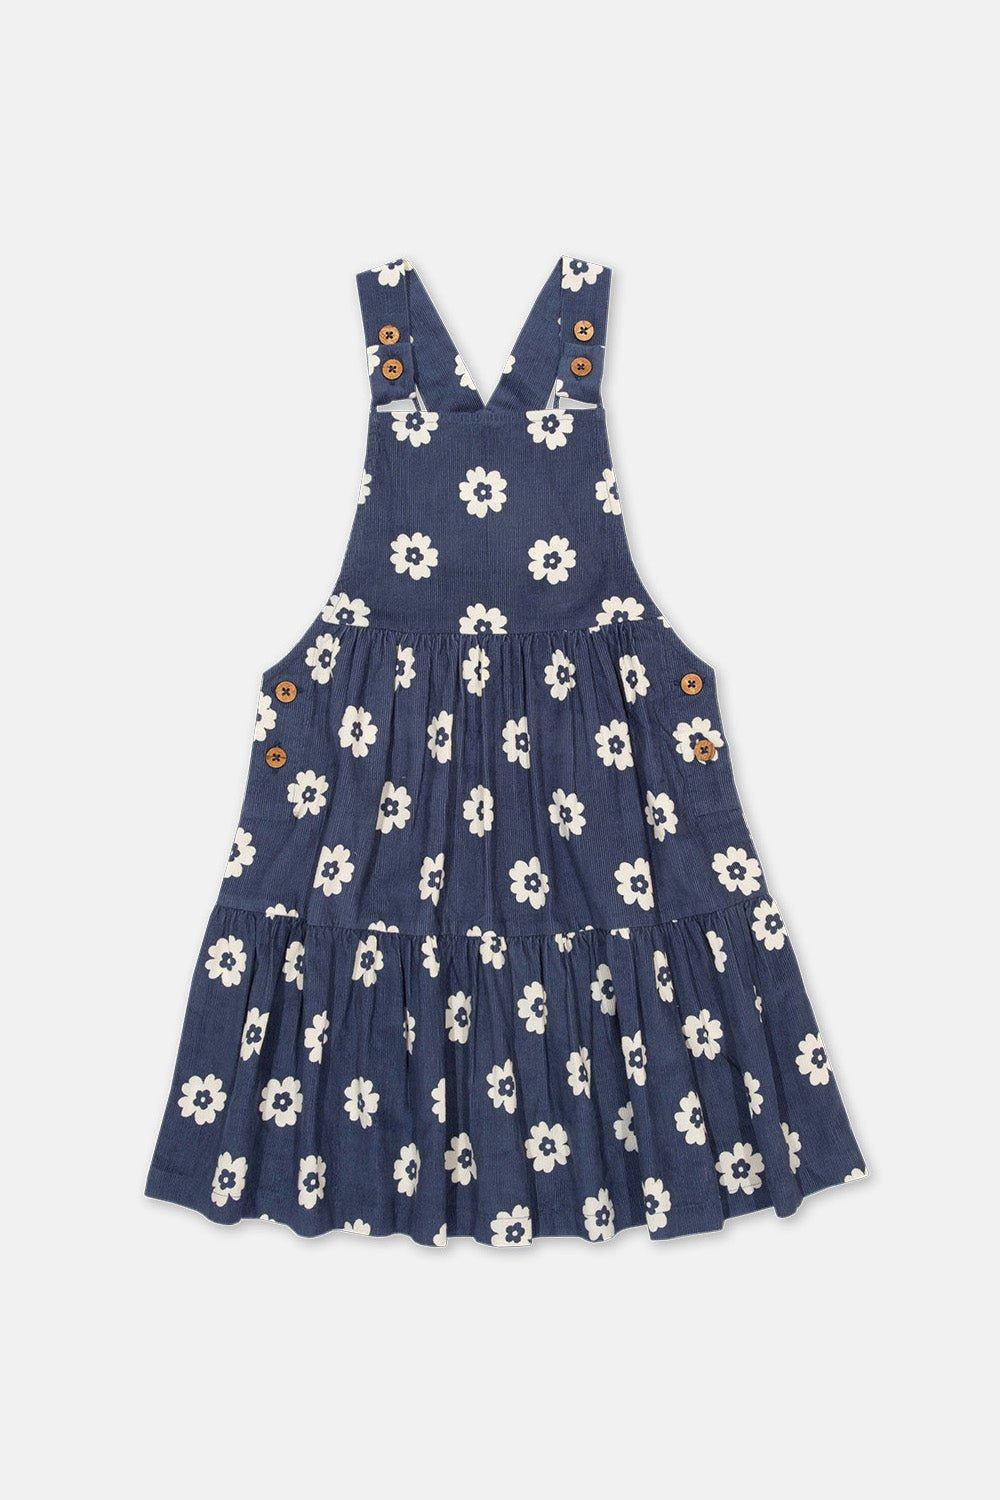 Fab Flower Pinafore